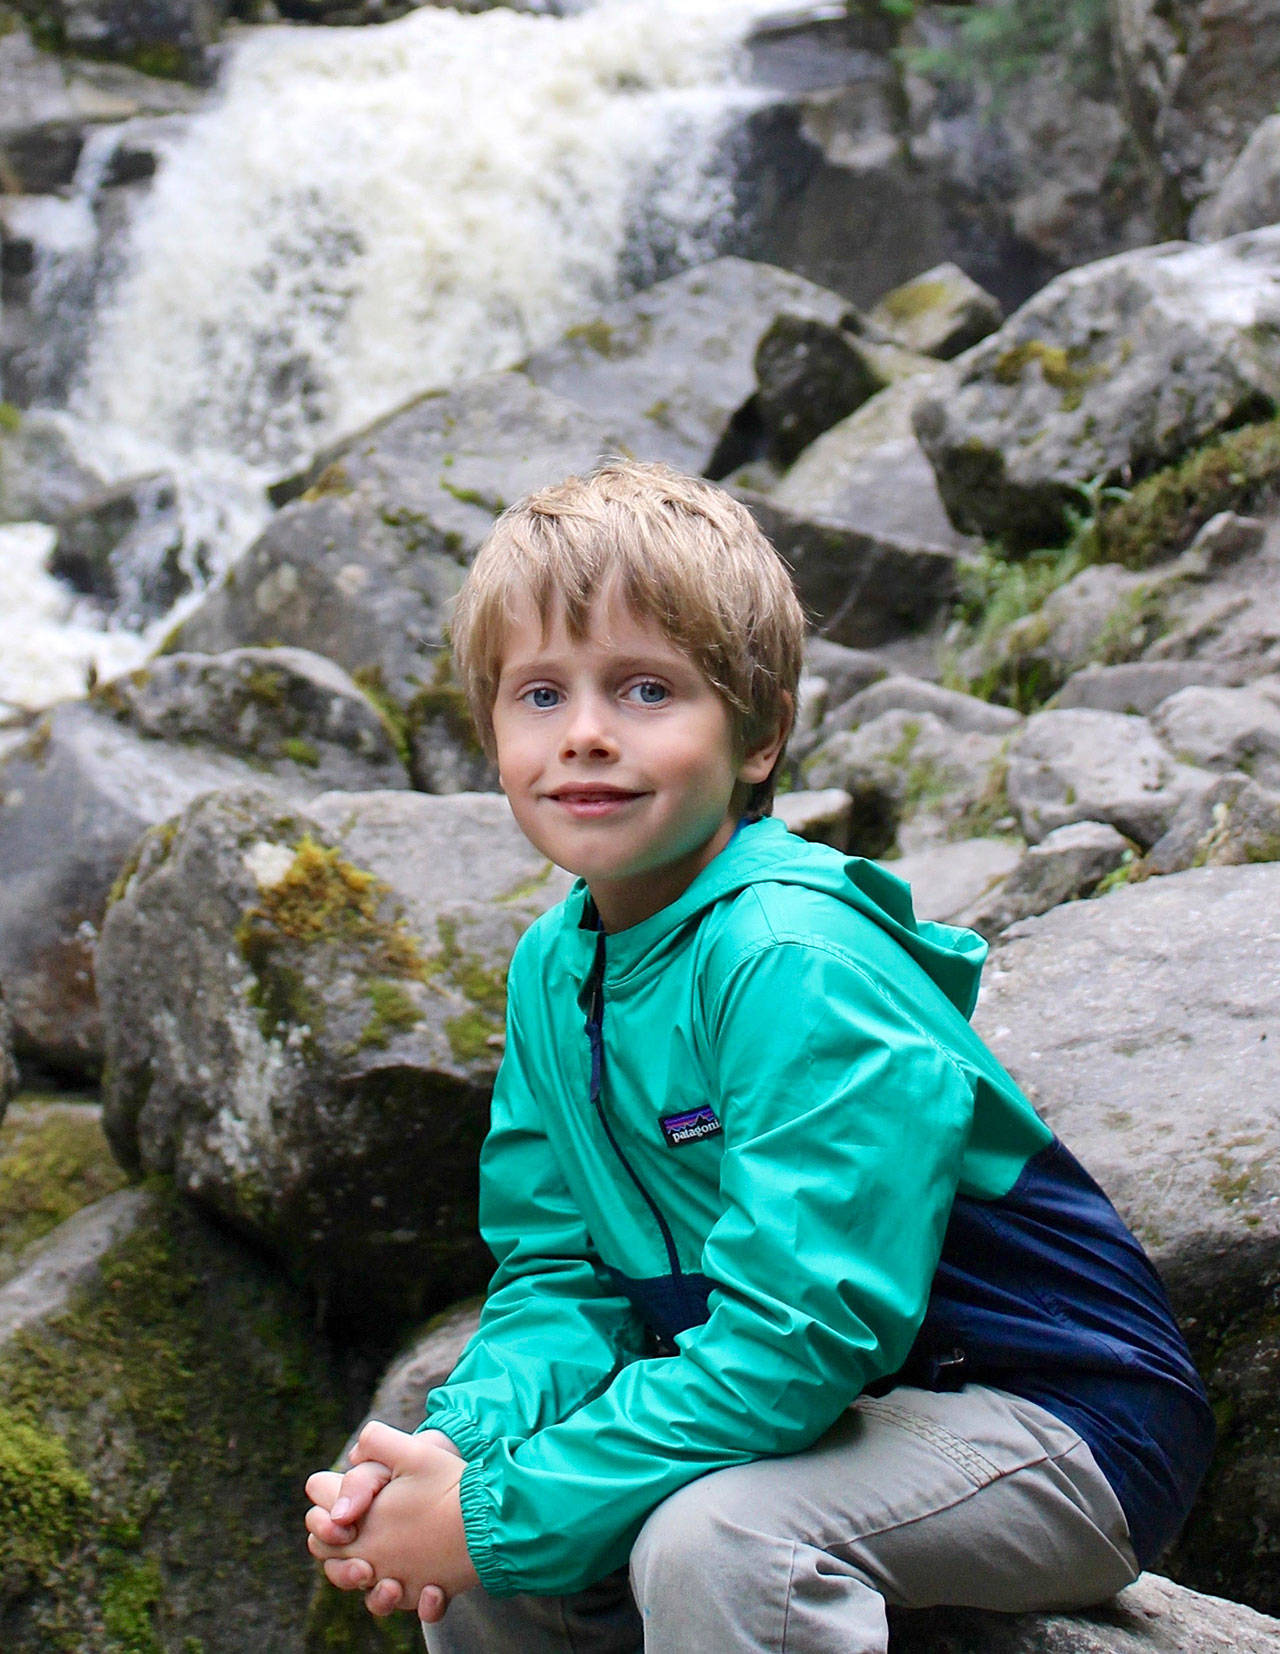 The Mercer Island community is supporting the family of Ewan Lill, who died after a battle with Acute Lymphoblastic Leukemia on May 7, as they continue to raise money and support new immunotherapy treatments for childhood cancer. Photo courtesy of Jenny Harrington